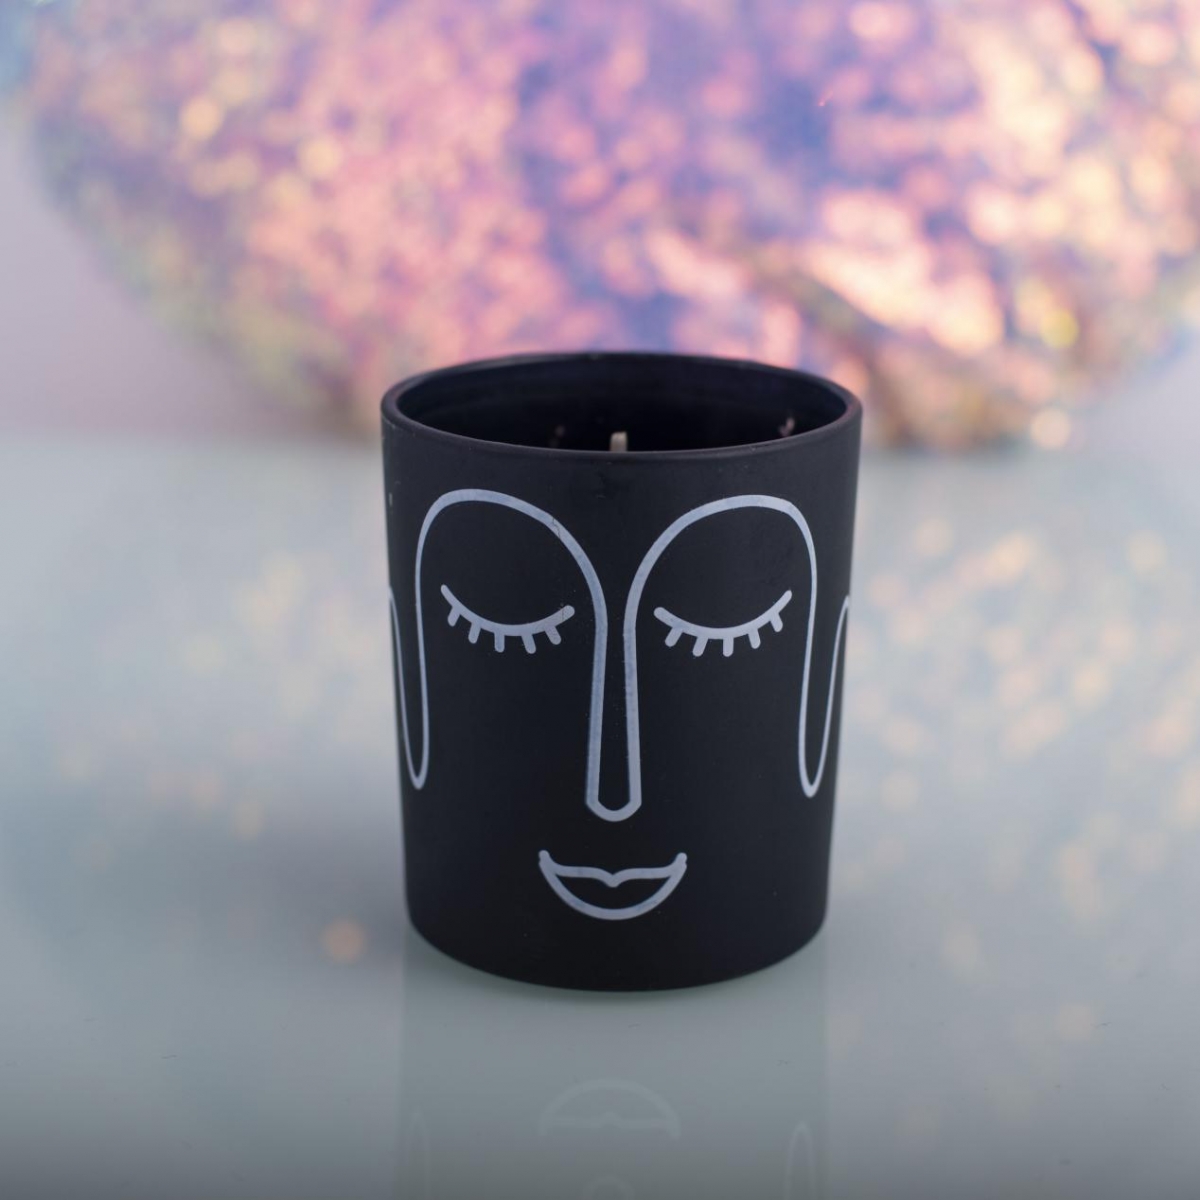 Scented Candles : Amitabha Buddha , Black Candle , Meditation , China Factory , Wholesale Price-HOWCANDLE-Candles,Scented Candles,Aromatherapy Candles,Soy Candles,Vegan Candles,Jar Candles,Pillar Candles,Candle Gift Sets,Essential Oils,Reed Diffuser,Candle Holder,